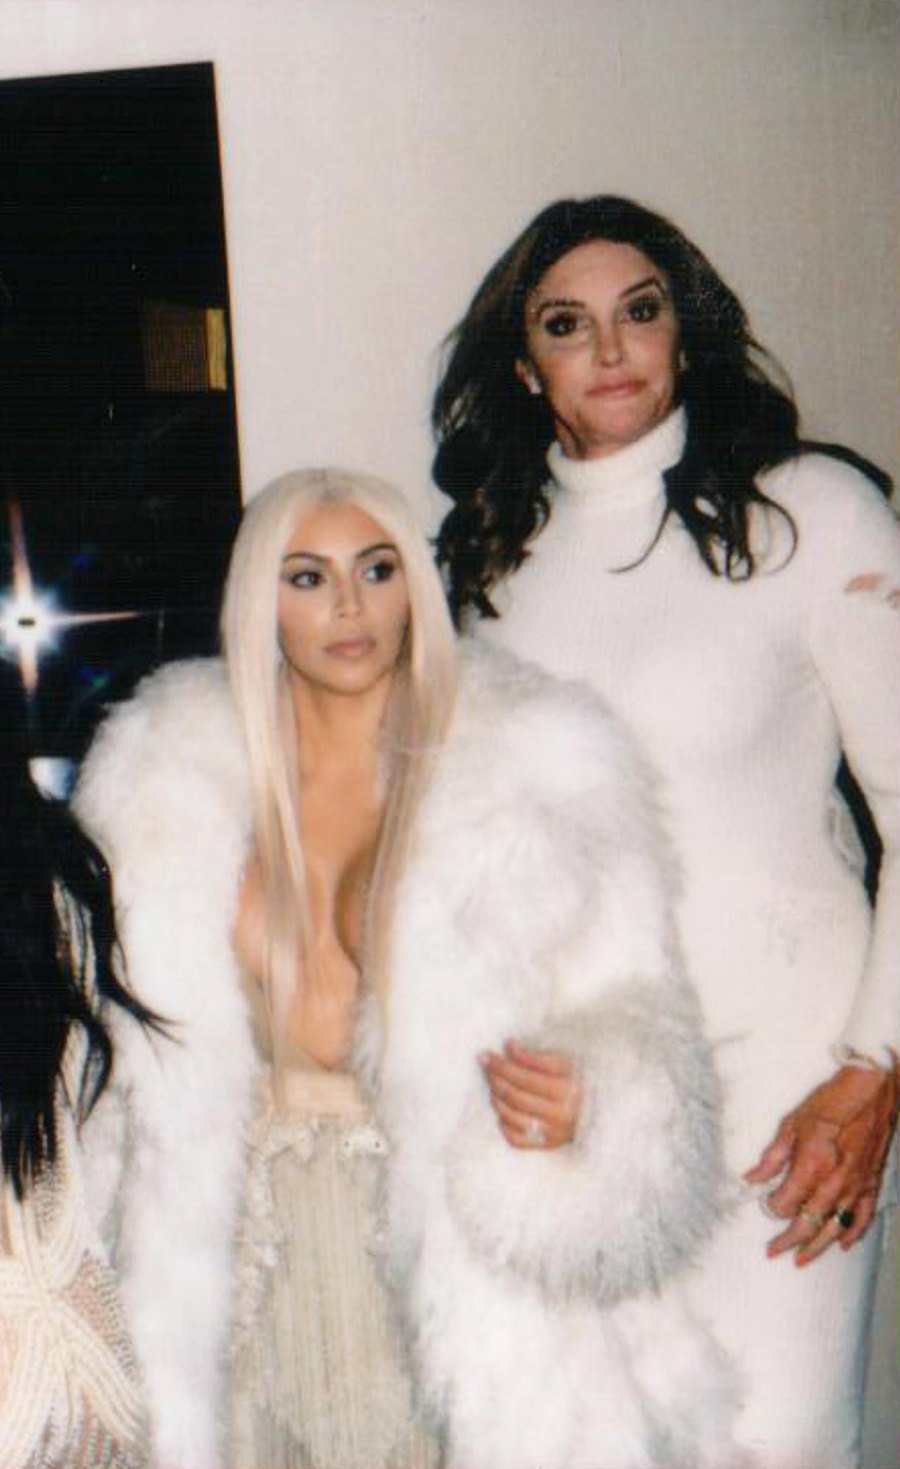 The-Kardashian-Siblings-Ups-and-Downs-With-Caitlyn-Jenner-680